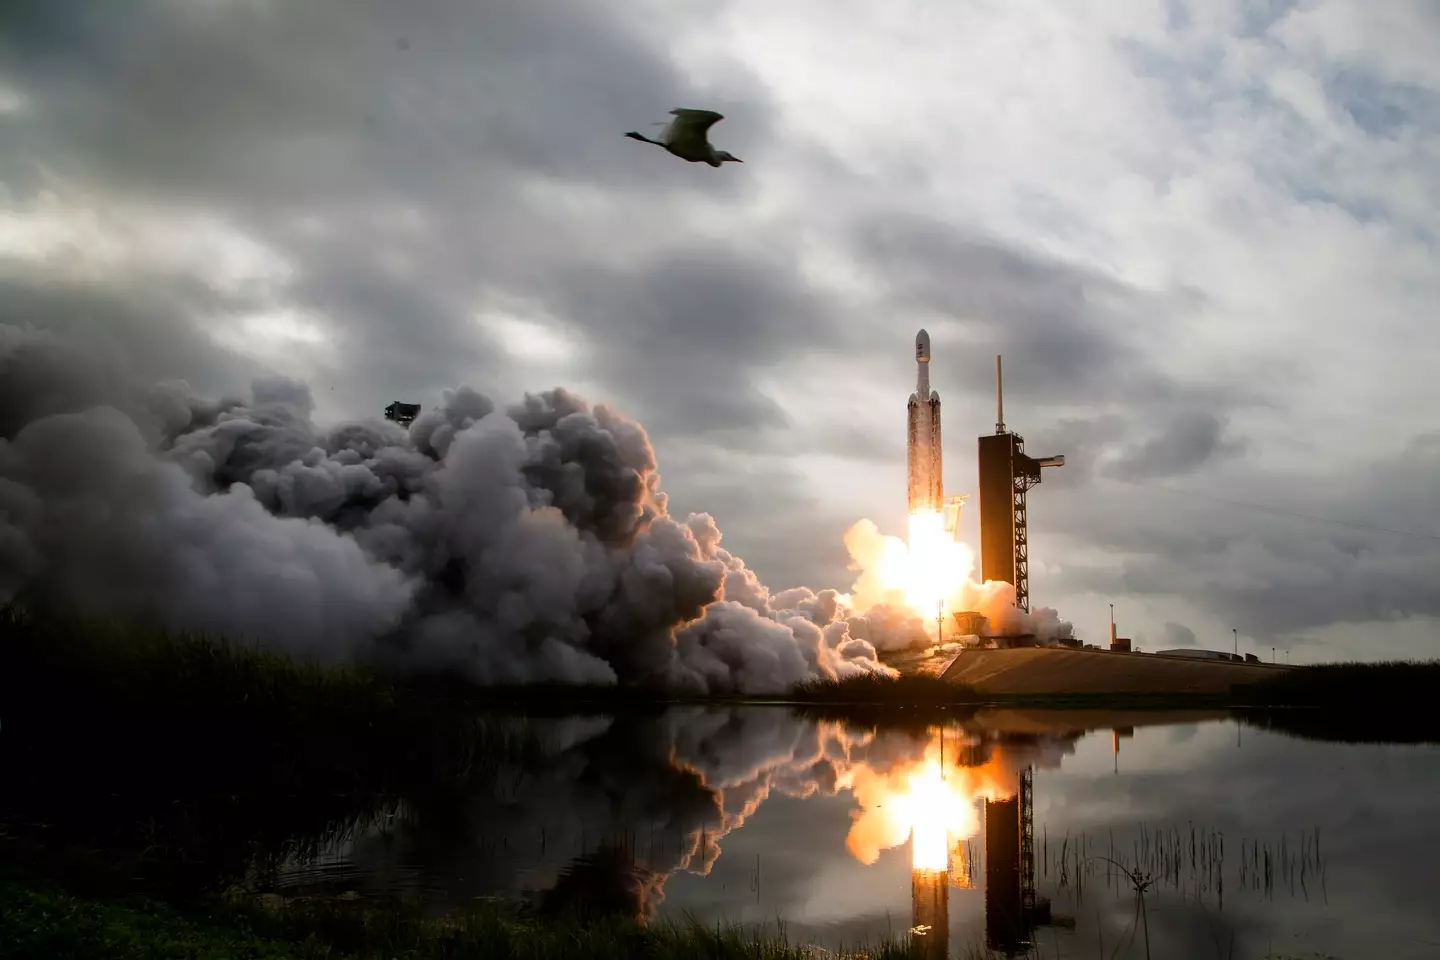 The Psyche satellite was launched last year by NASA. (Aubrey Gemignani/NASA via Getty Images)